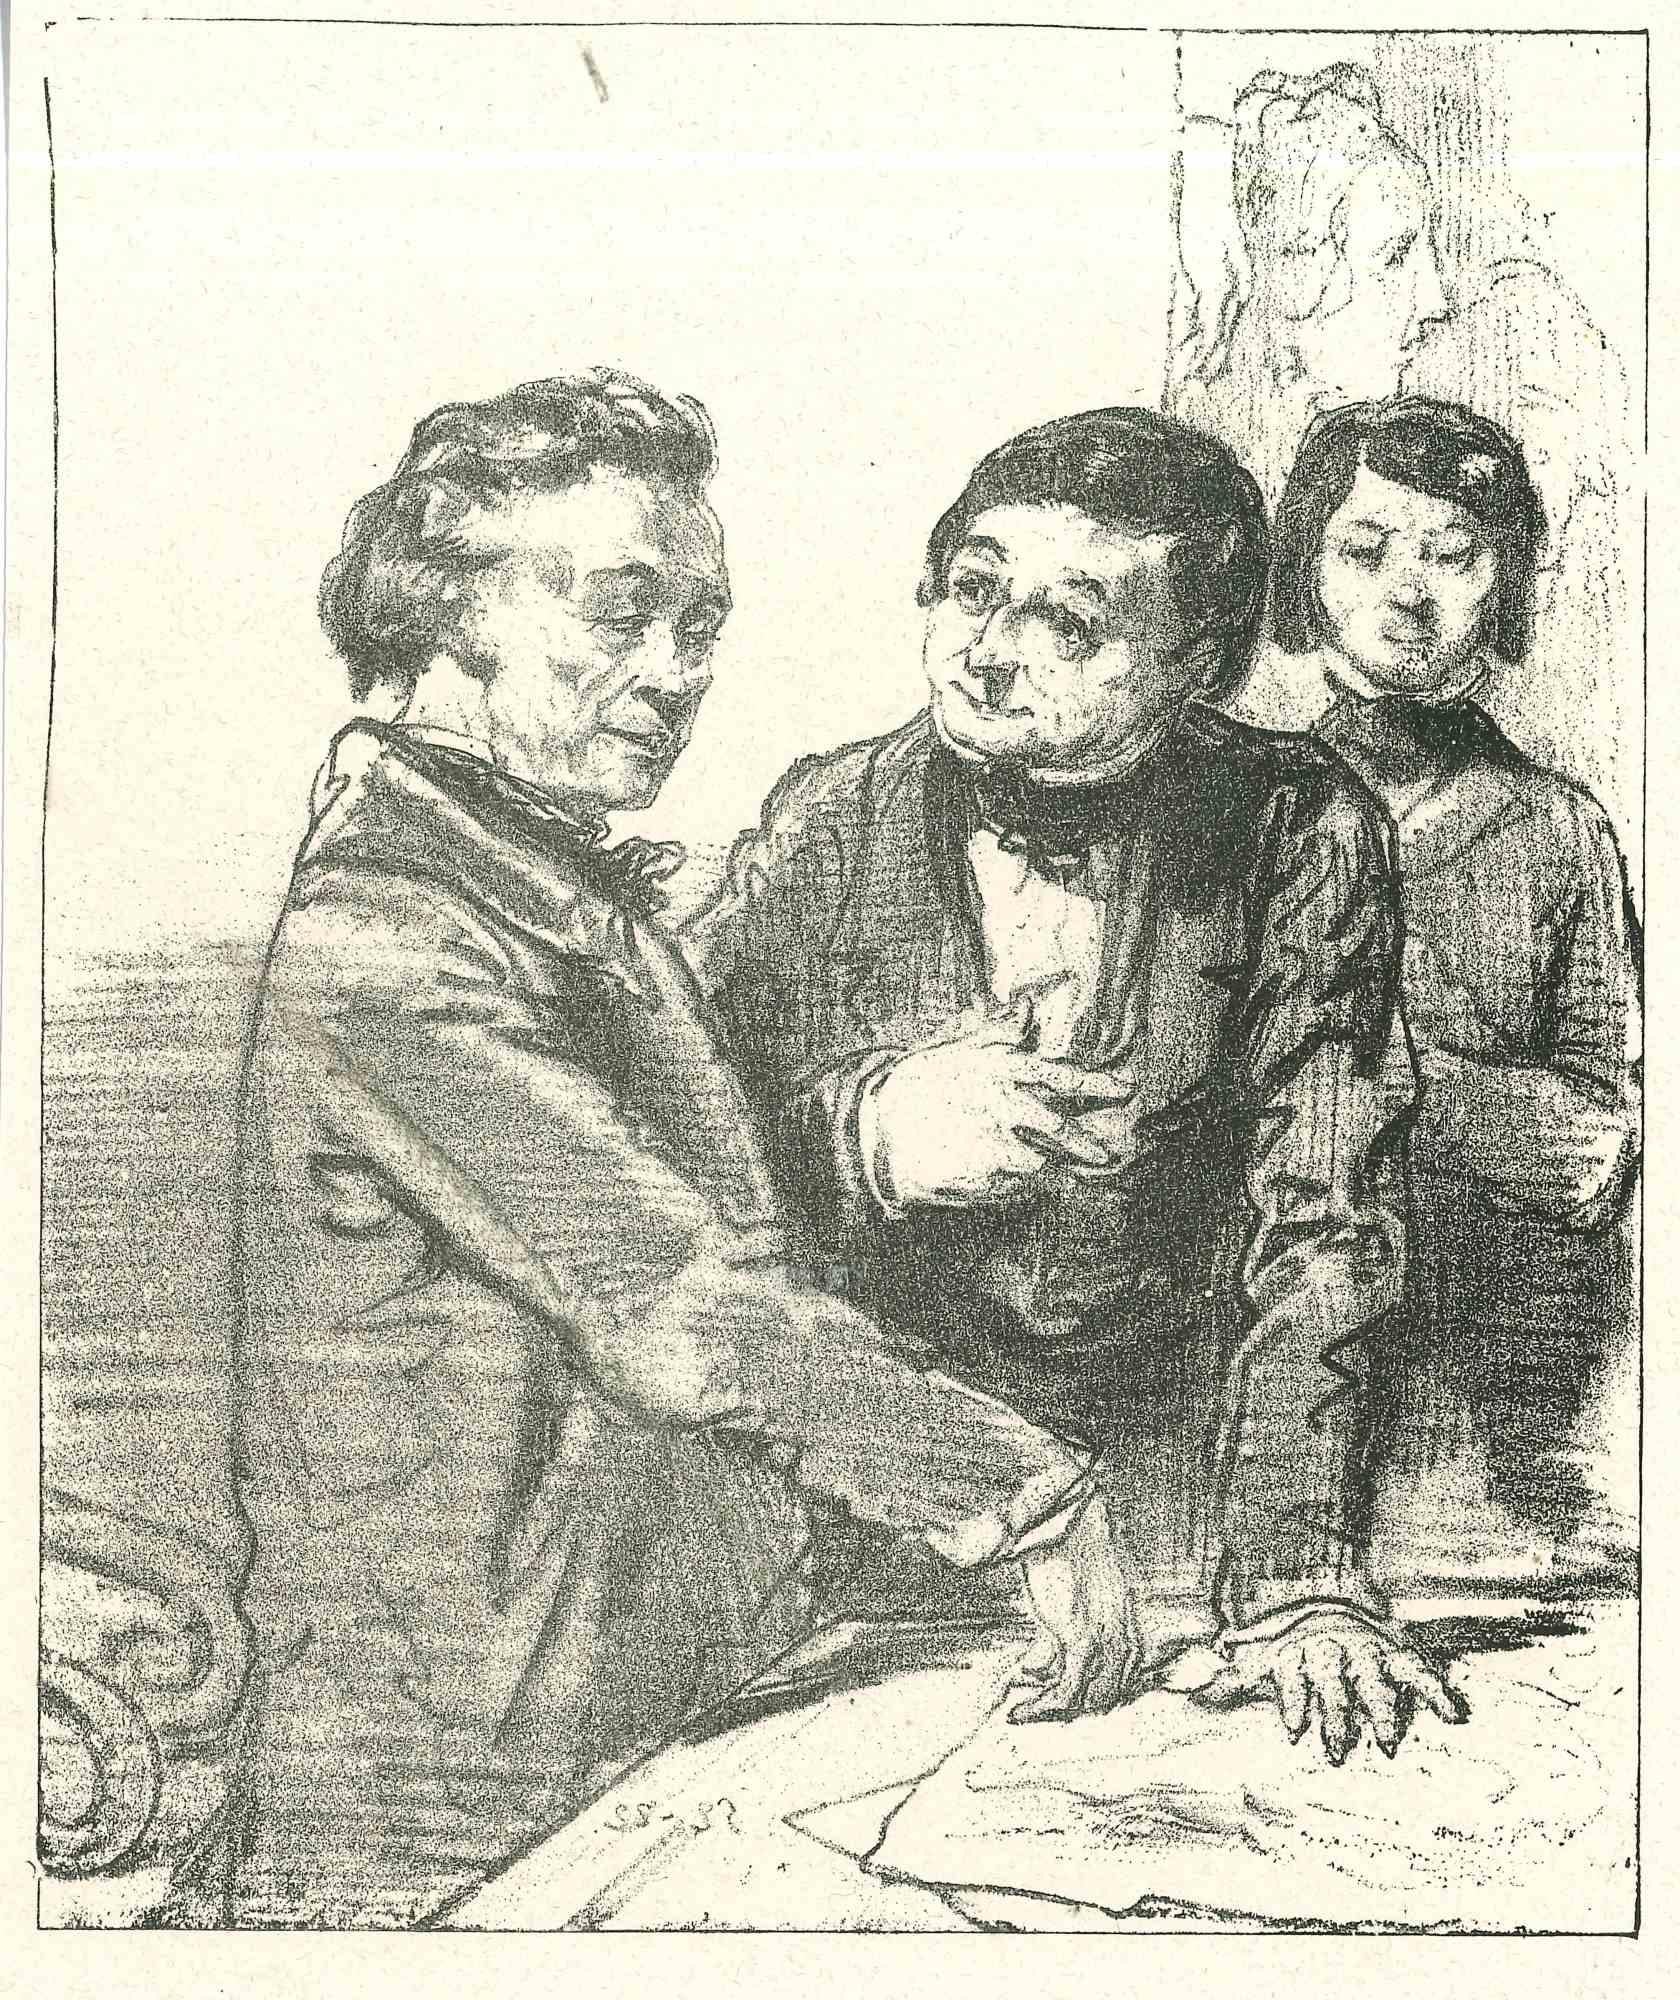 The convincing is an original lithograph artwork on ivory-colored paper, realized by the French draftsman Paul Gavarni (after) (alias Guillaume Sulpice Chevalier Gavarni, 1804-1866) in Paris, 1881, in the collection of Illustrations for "La